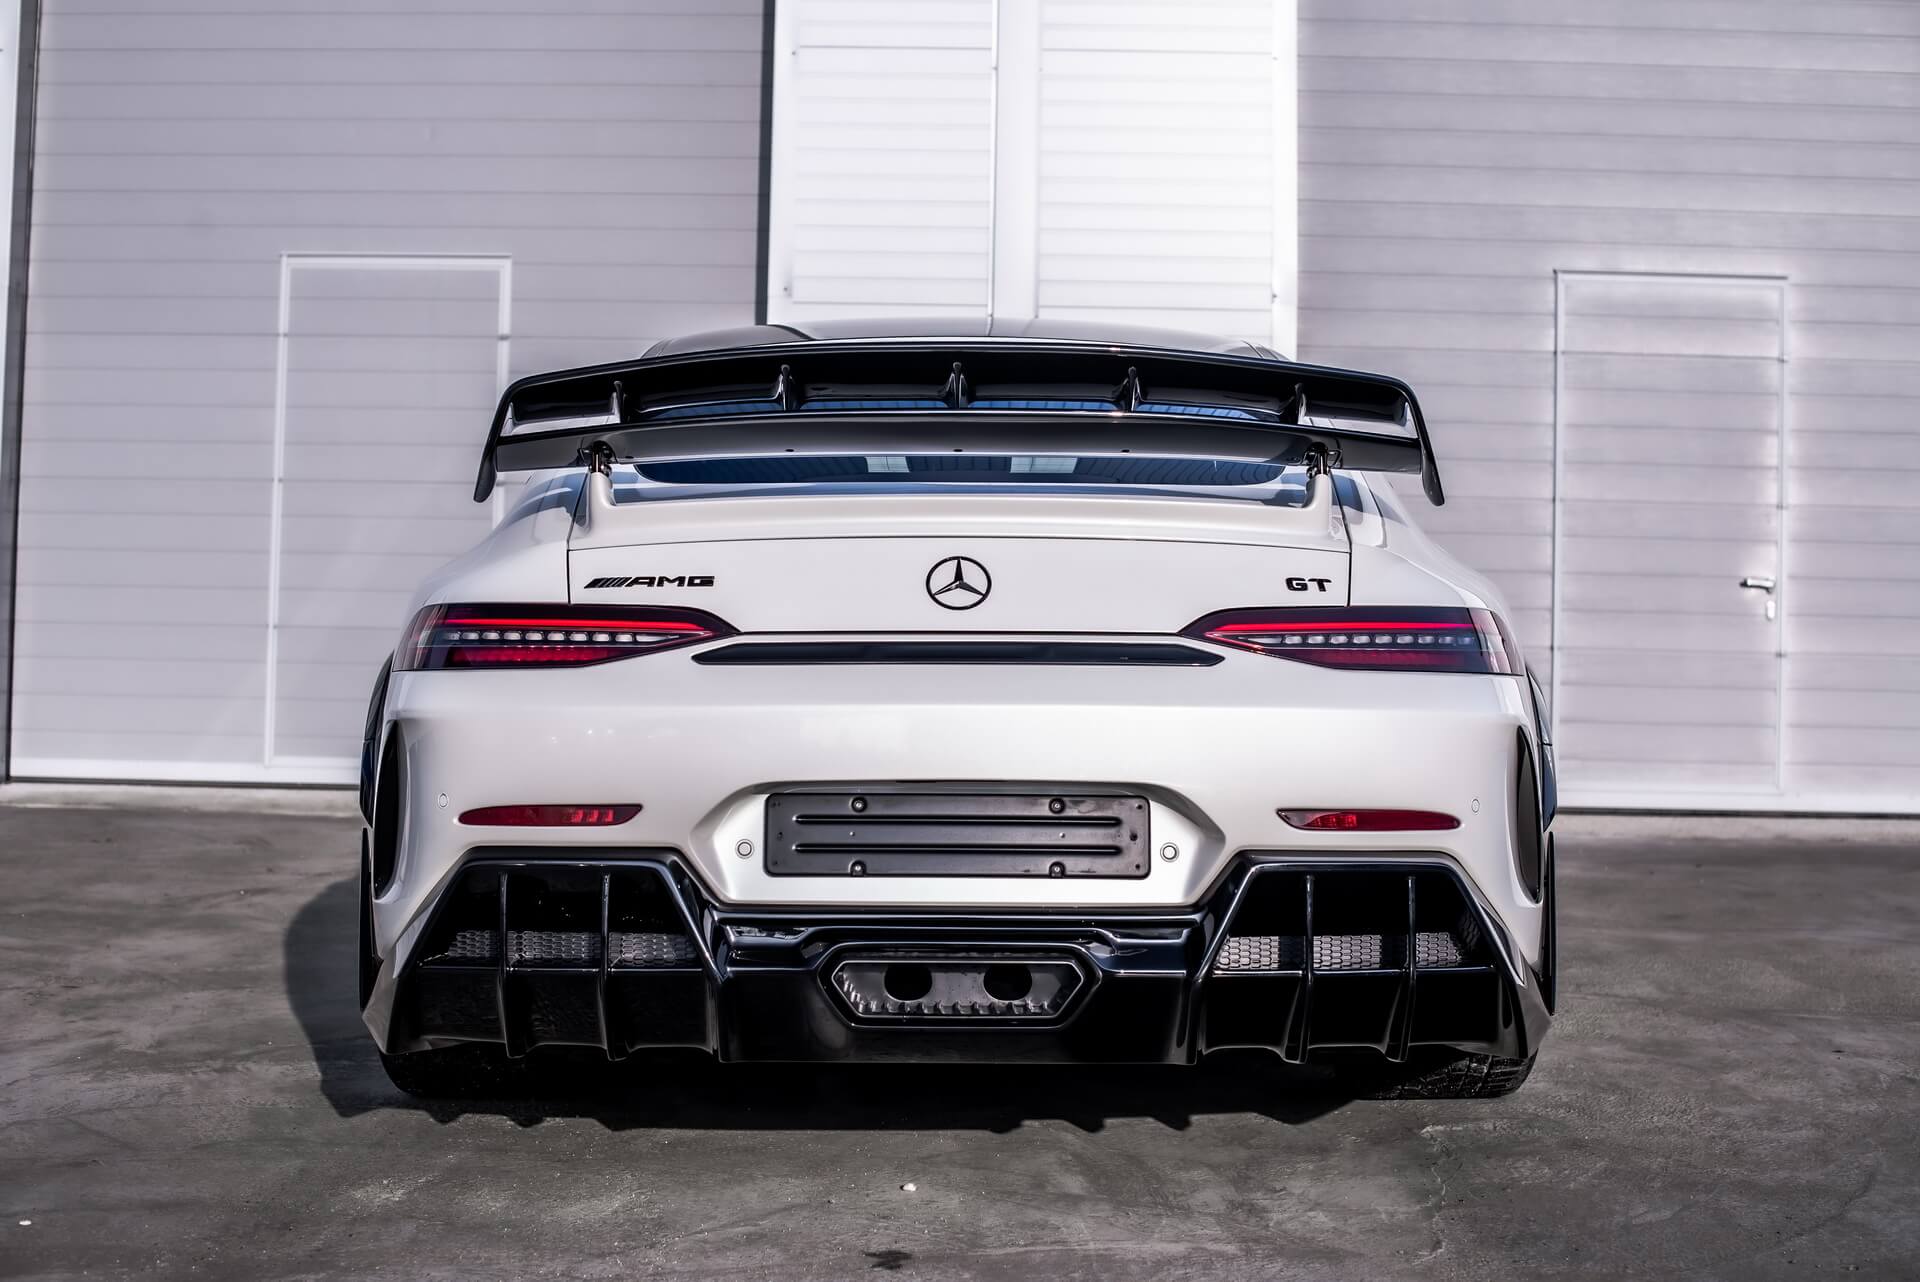 Check price and buy SCL Performance Carbon Fiber Body kit set for Mercedes-AMG GT X290 63S Diamant Gt